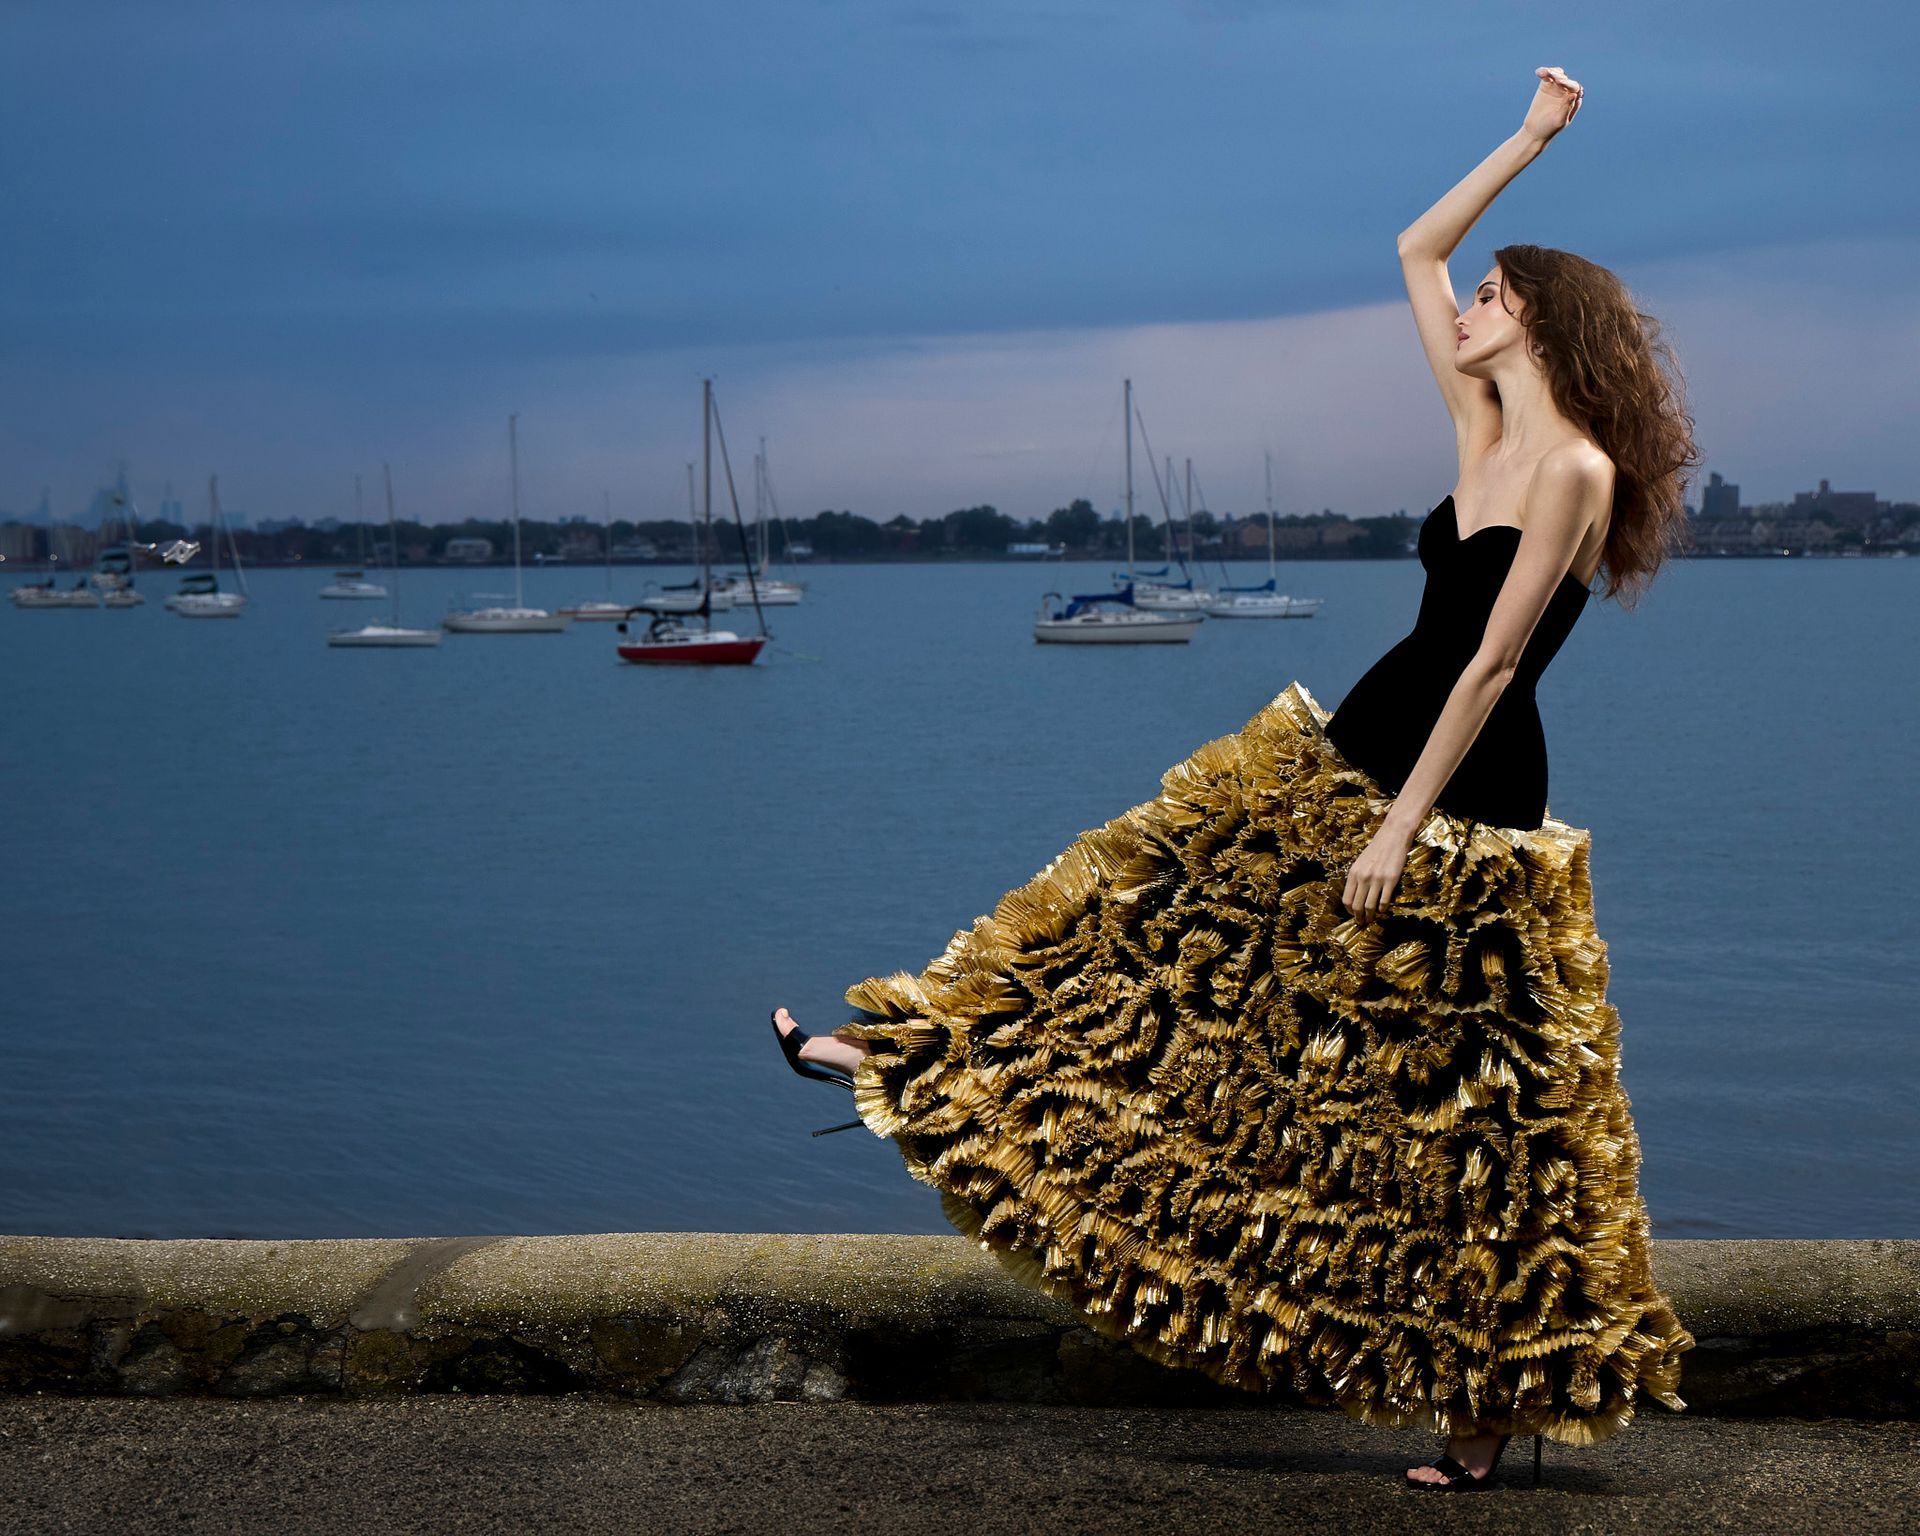 International vogue model in high-end evening gown. Standing in the grass near a body of water with high stride.